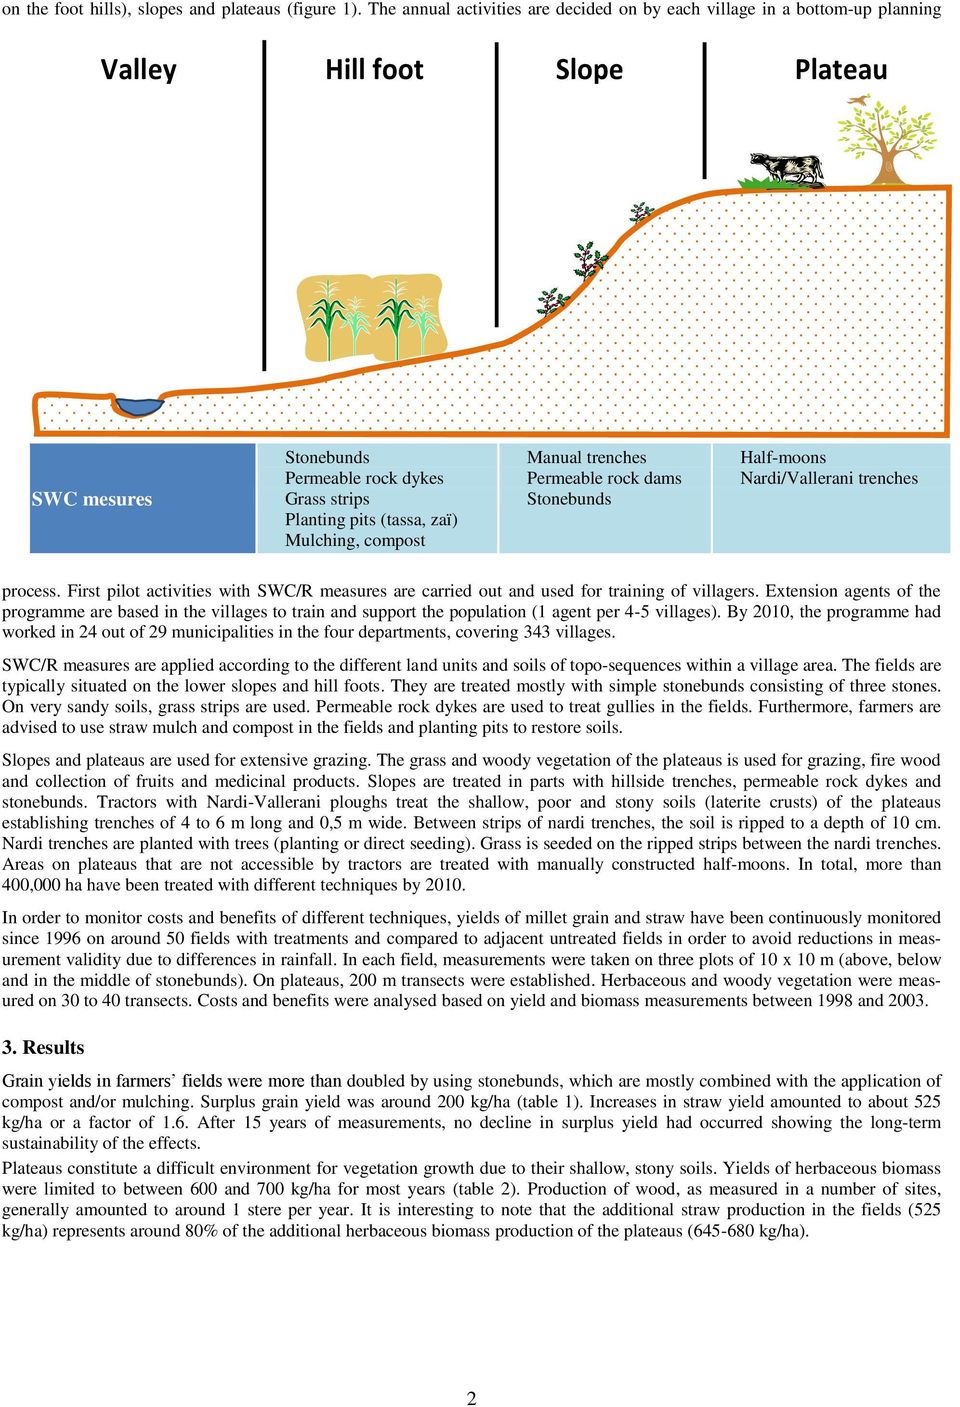 Mulching, compost Manual trenches Permeable rock dams Stonebunds Half-moons Nardi/Vallerani trenches Figure 1: Typical toposequence and applied SWC measures process.